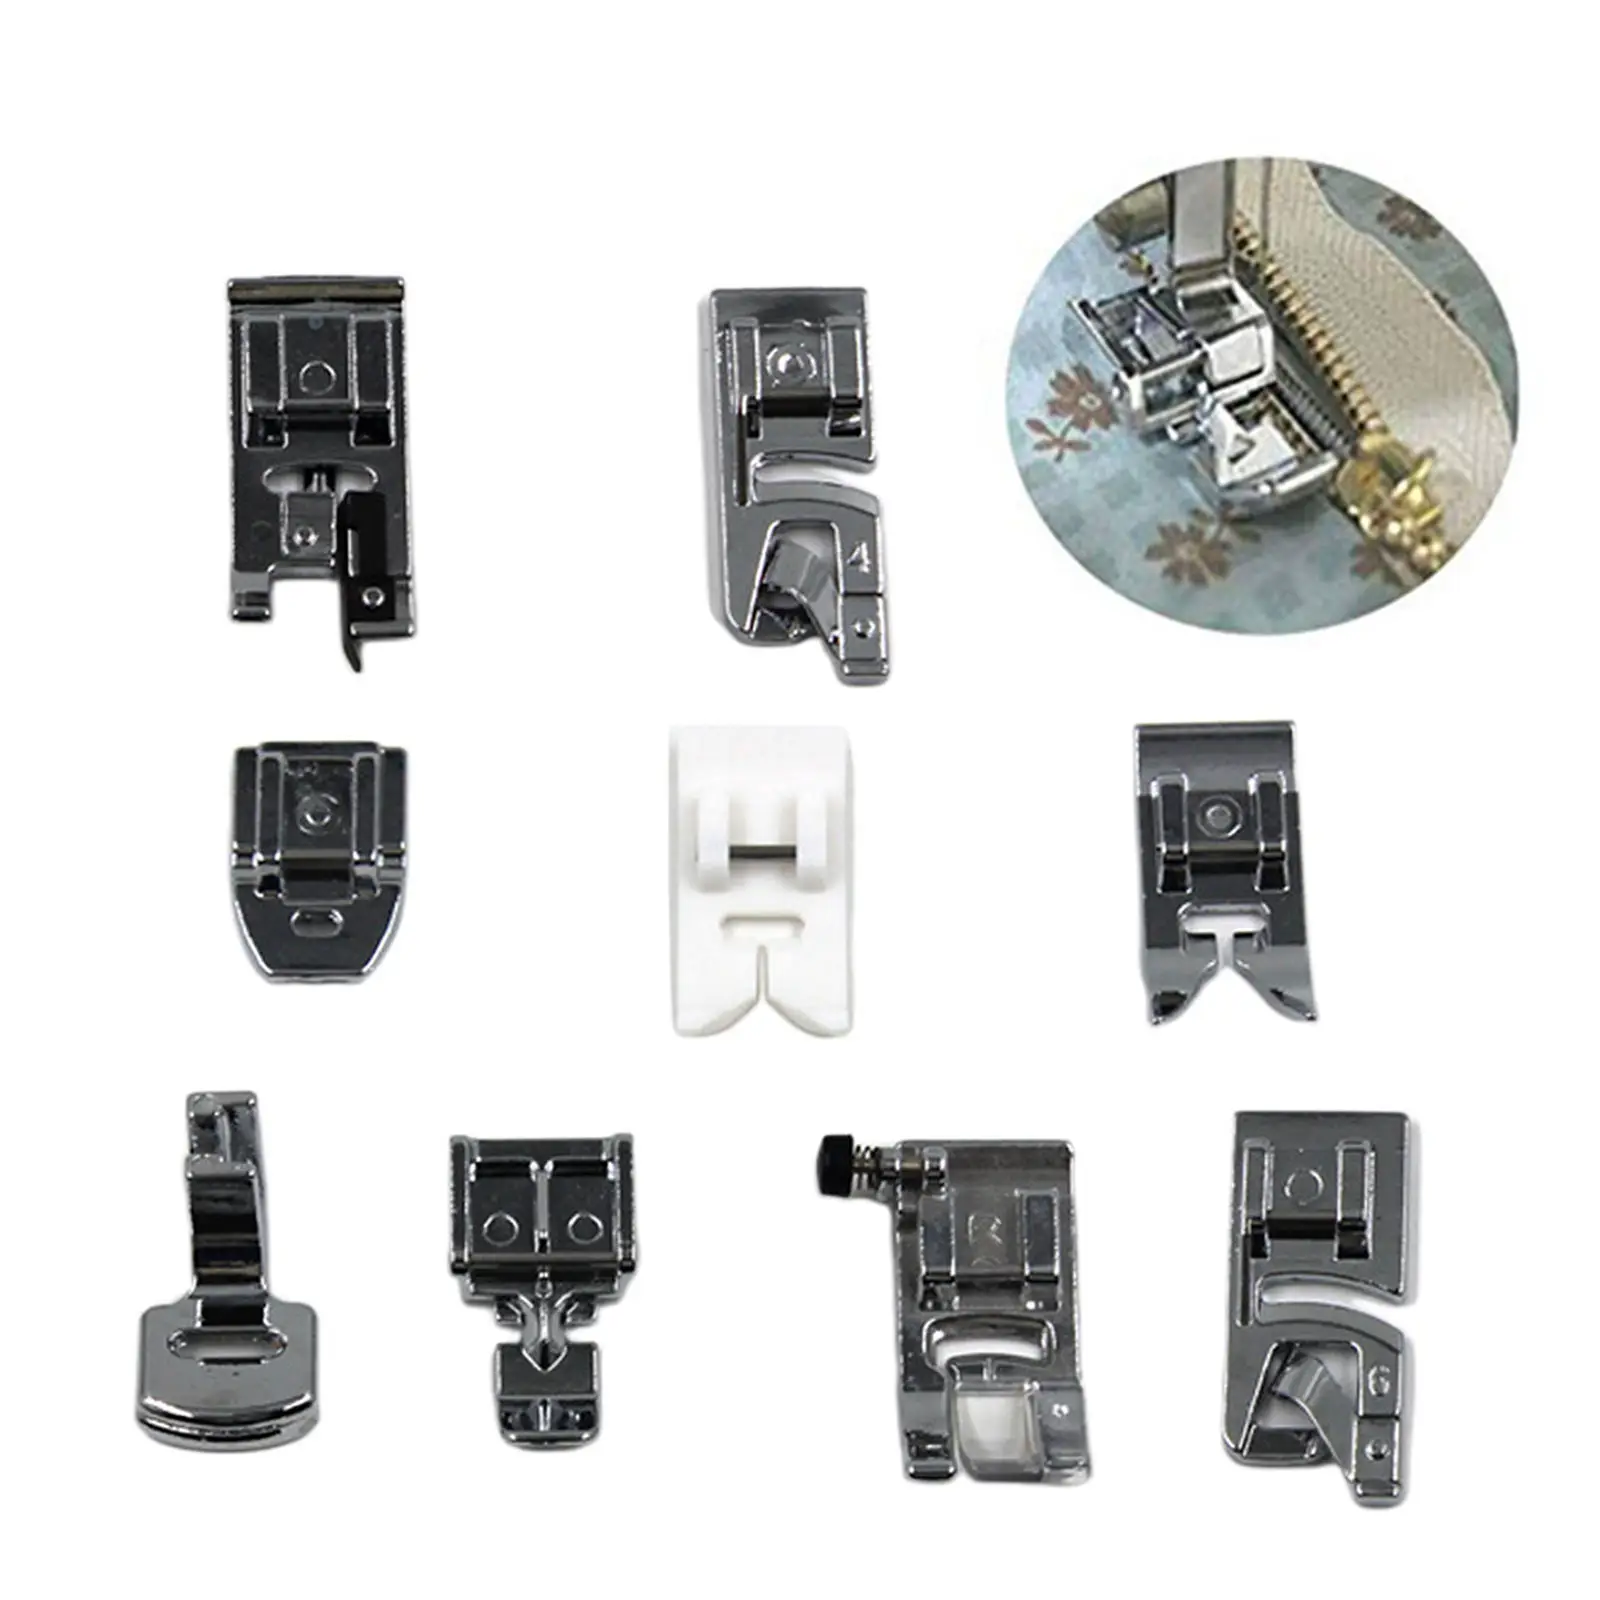 9Pcs Universal Adjustable Zipper Presser Foot Suitable for Most of Domestic Sewing Machines Clothes Draft Supplies